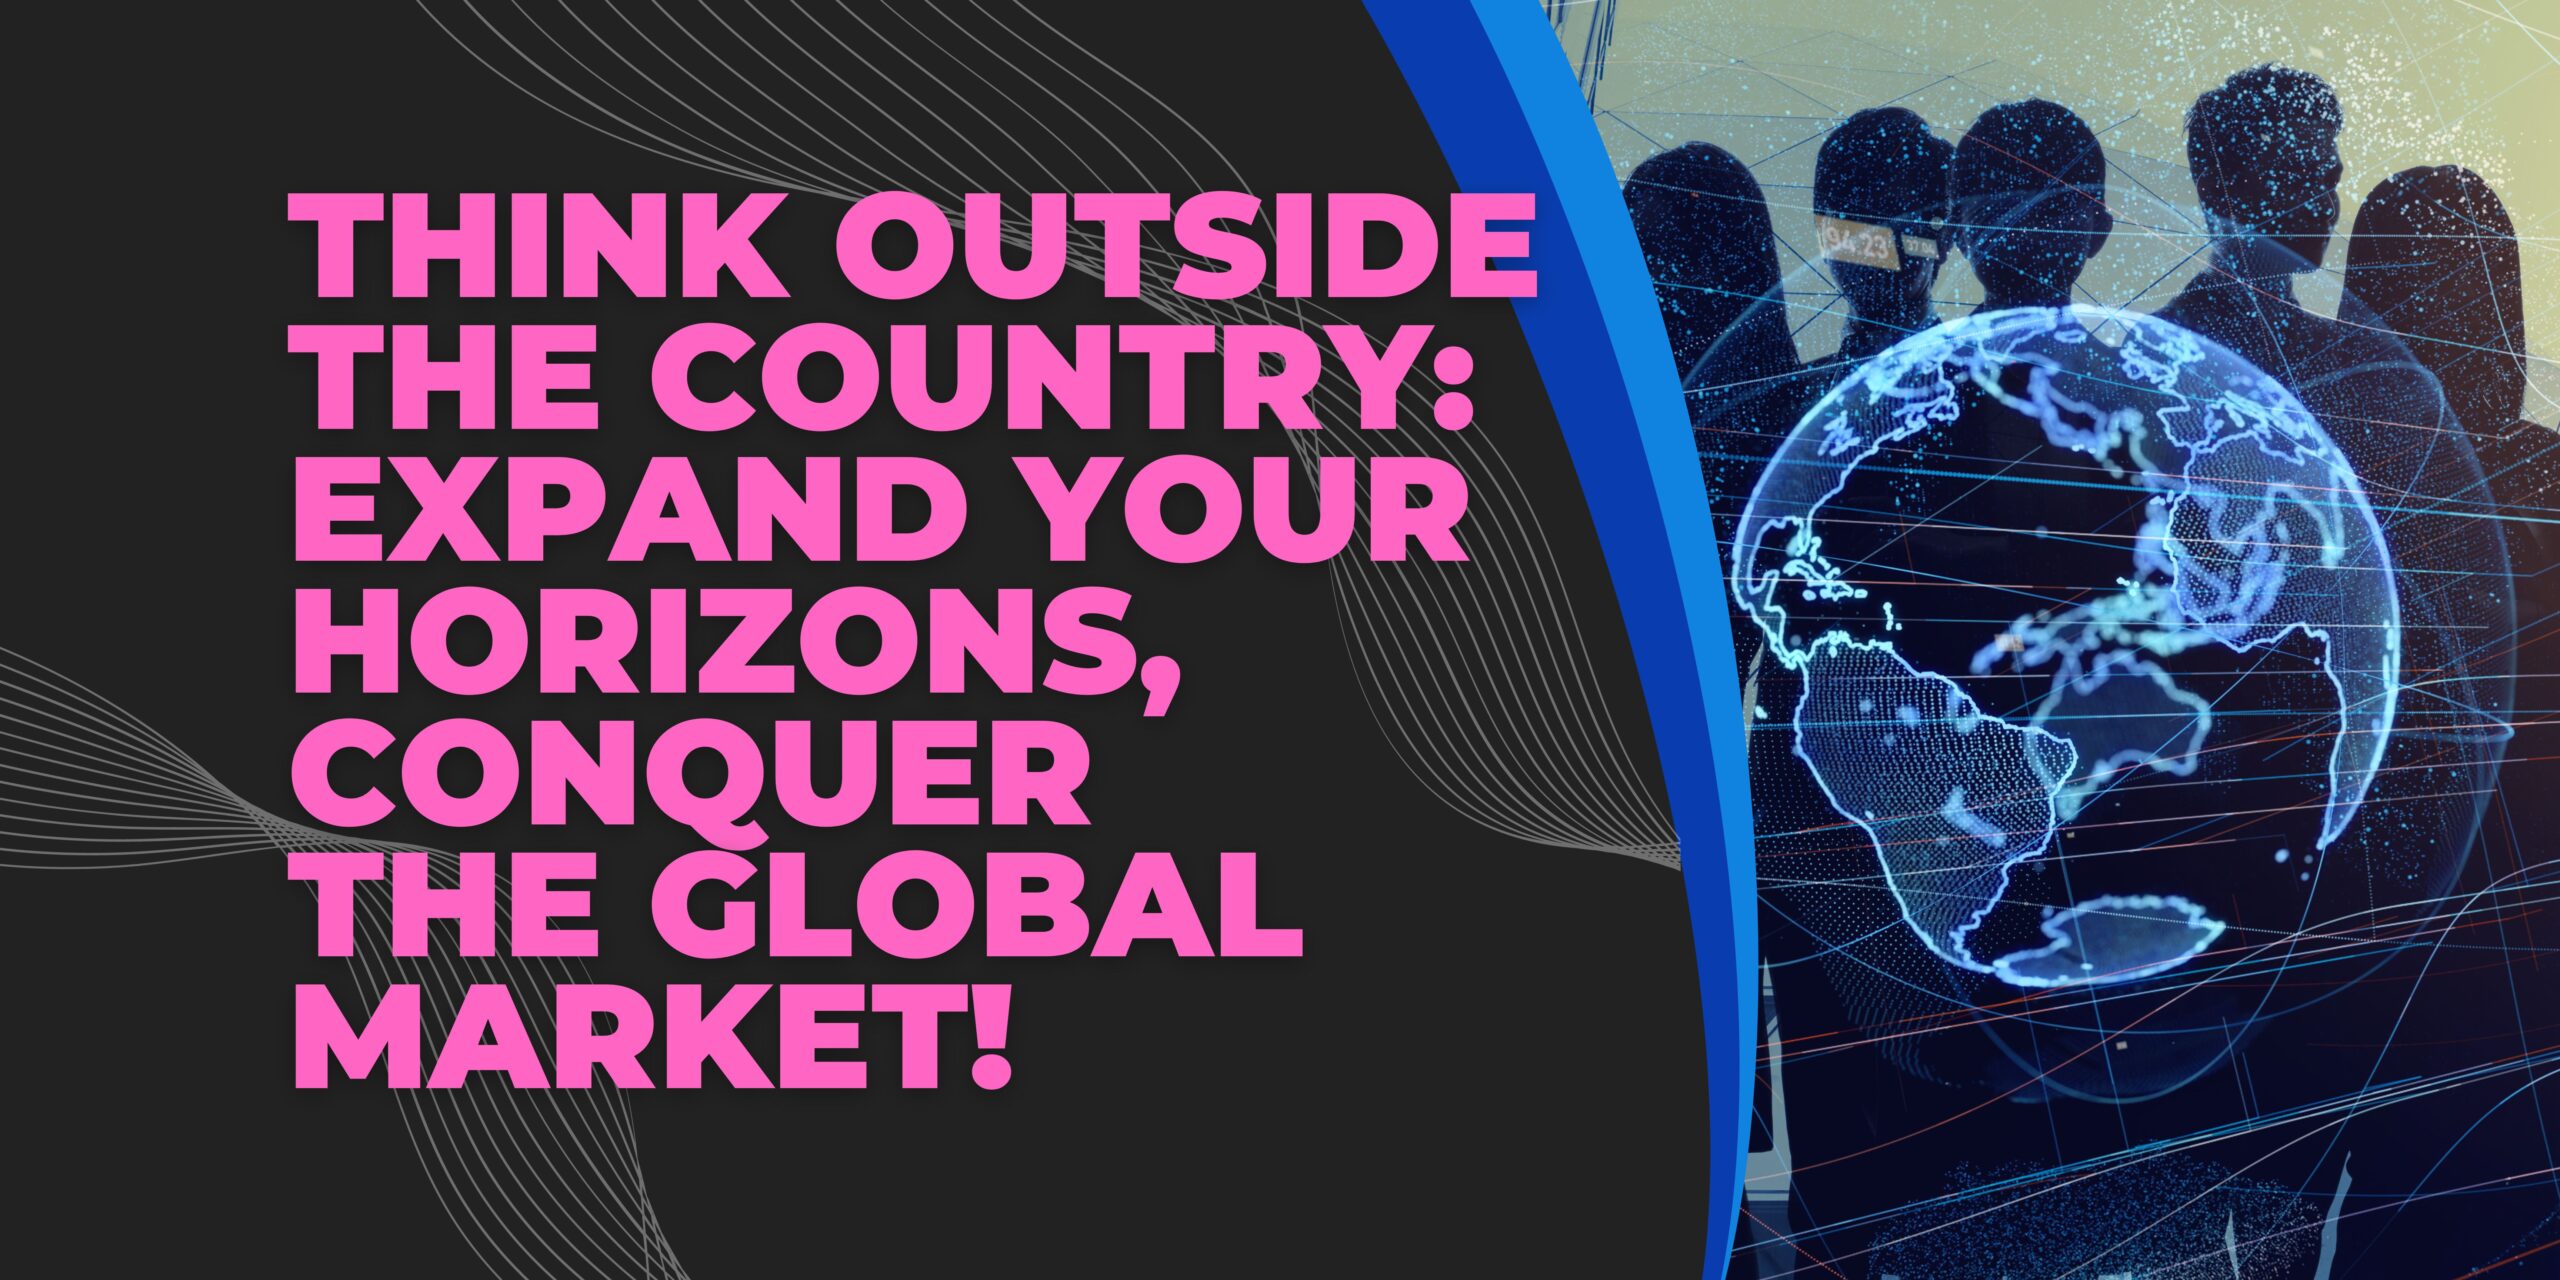 THINK OUTSIDE THE COUNTRY Expand Your Horizons, Conquer the Global Market!